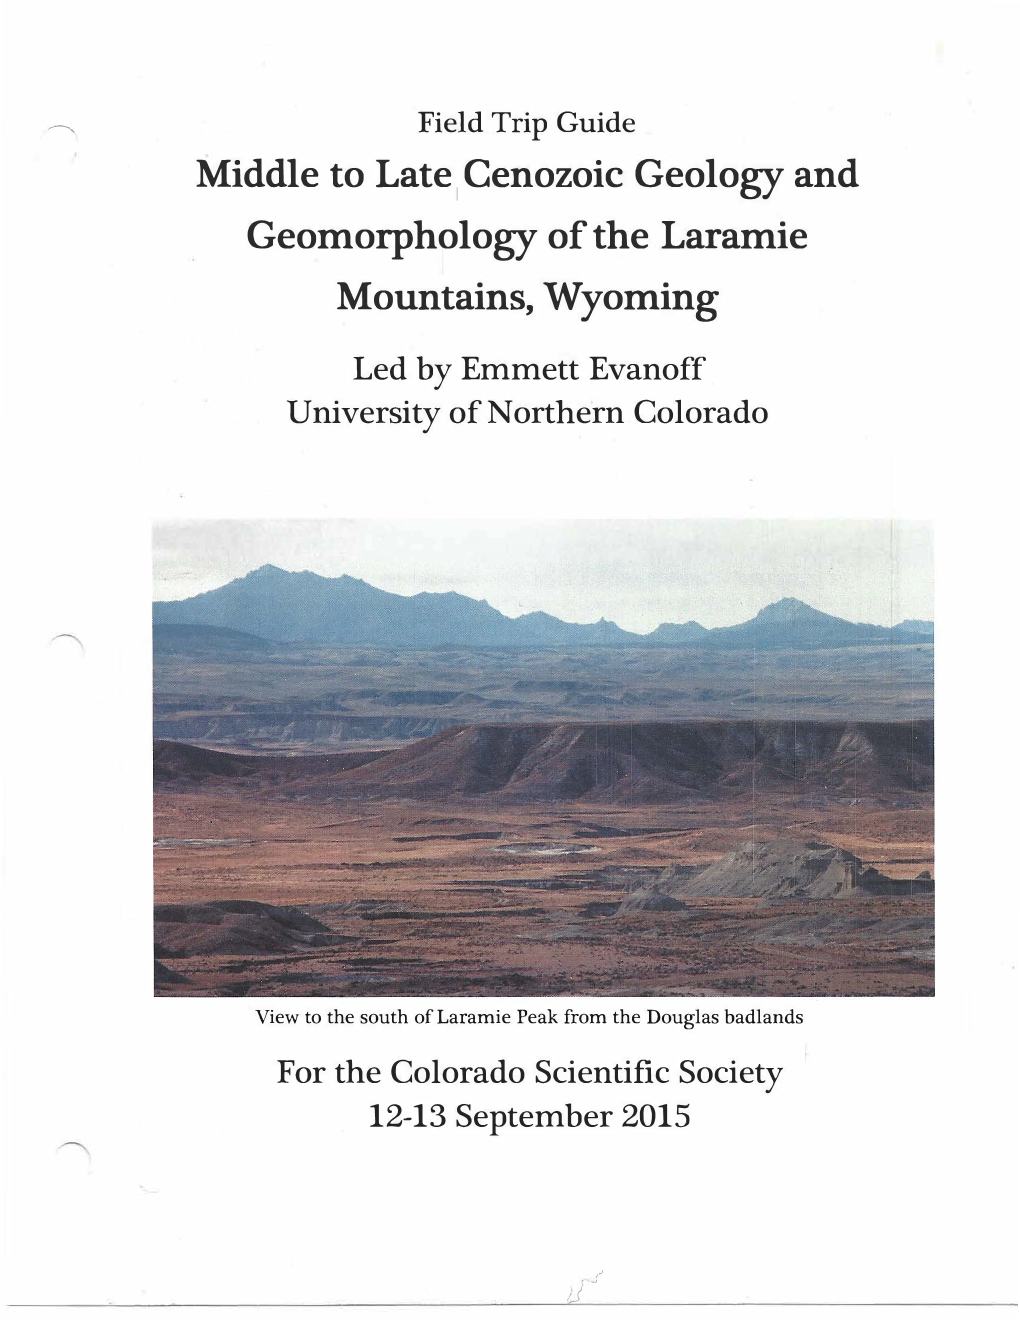 Middle to Late Cenozoic Geology and Geomorphology of the Laramie